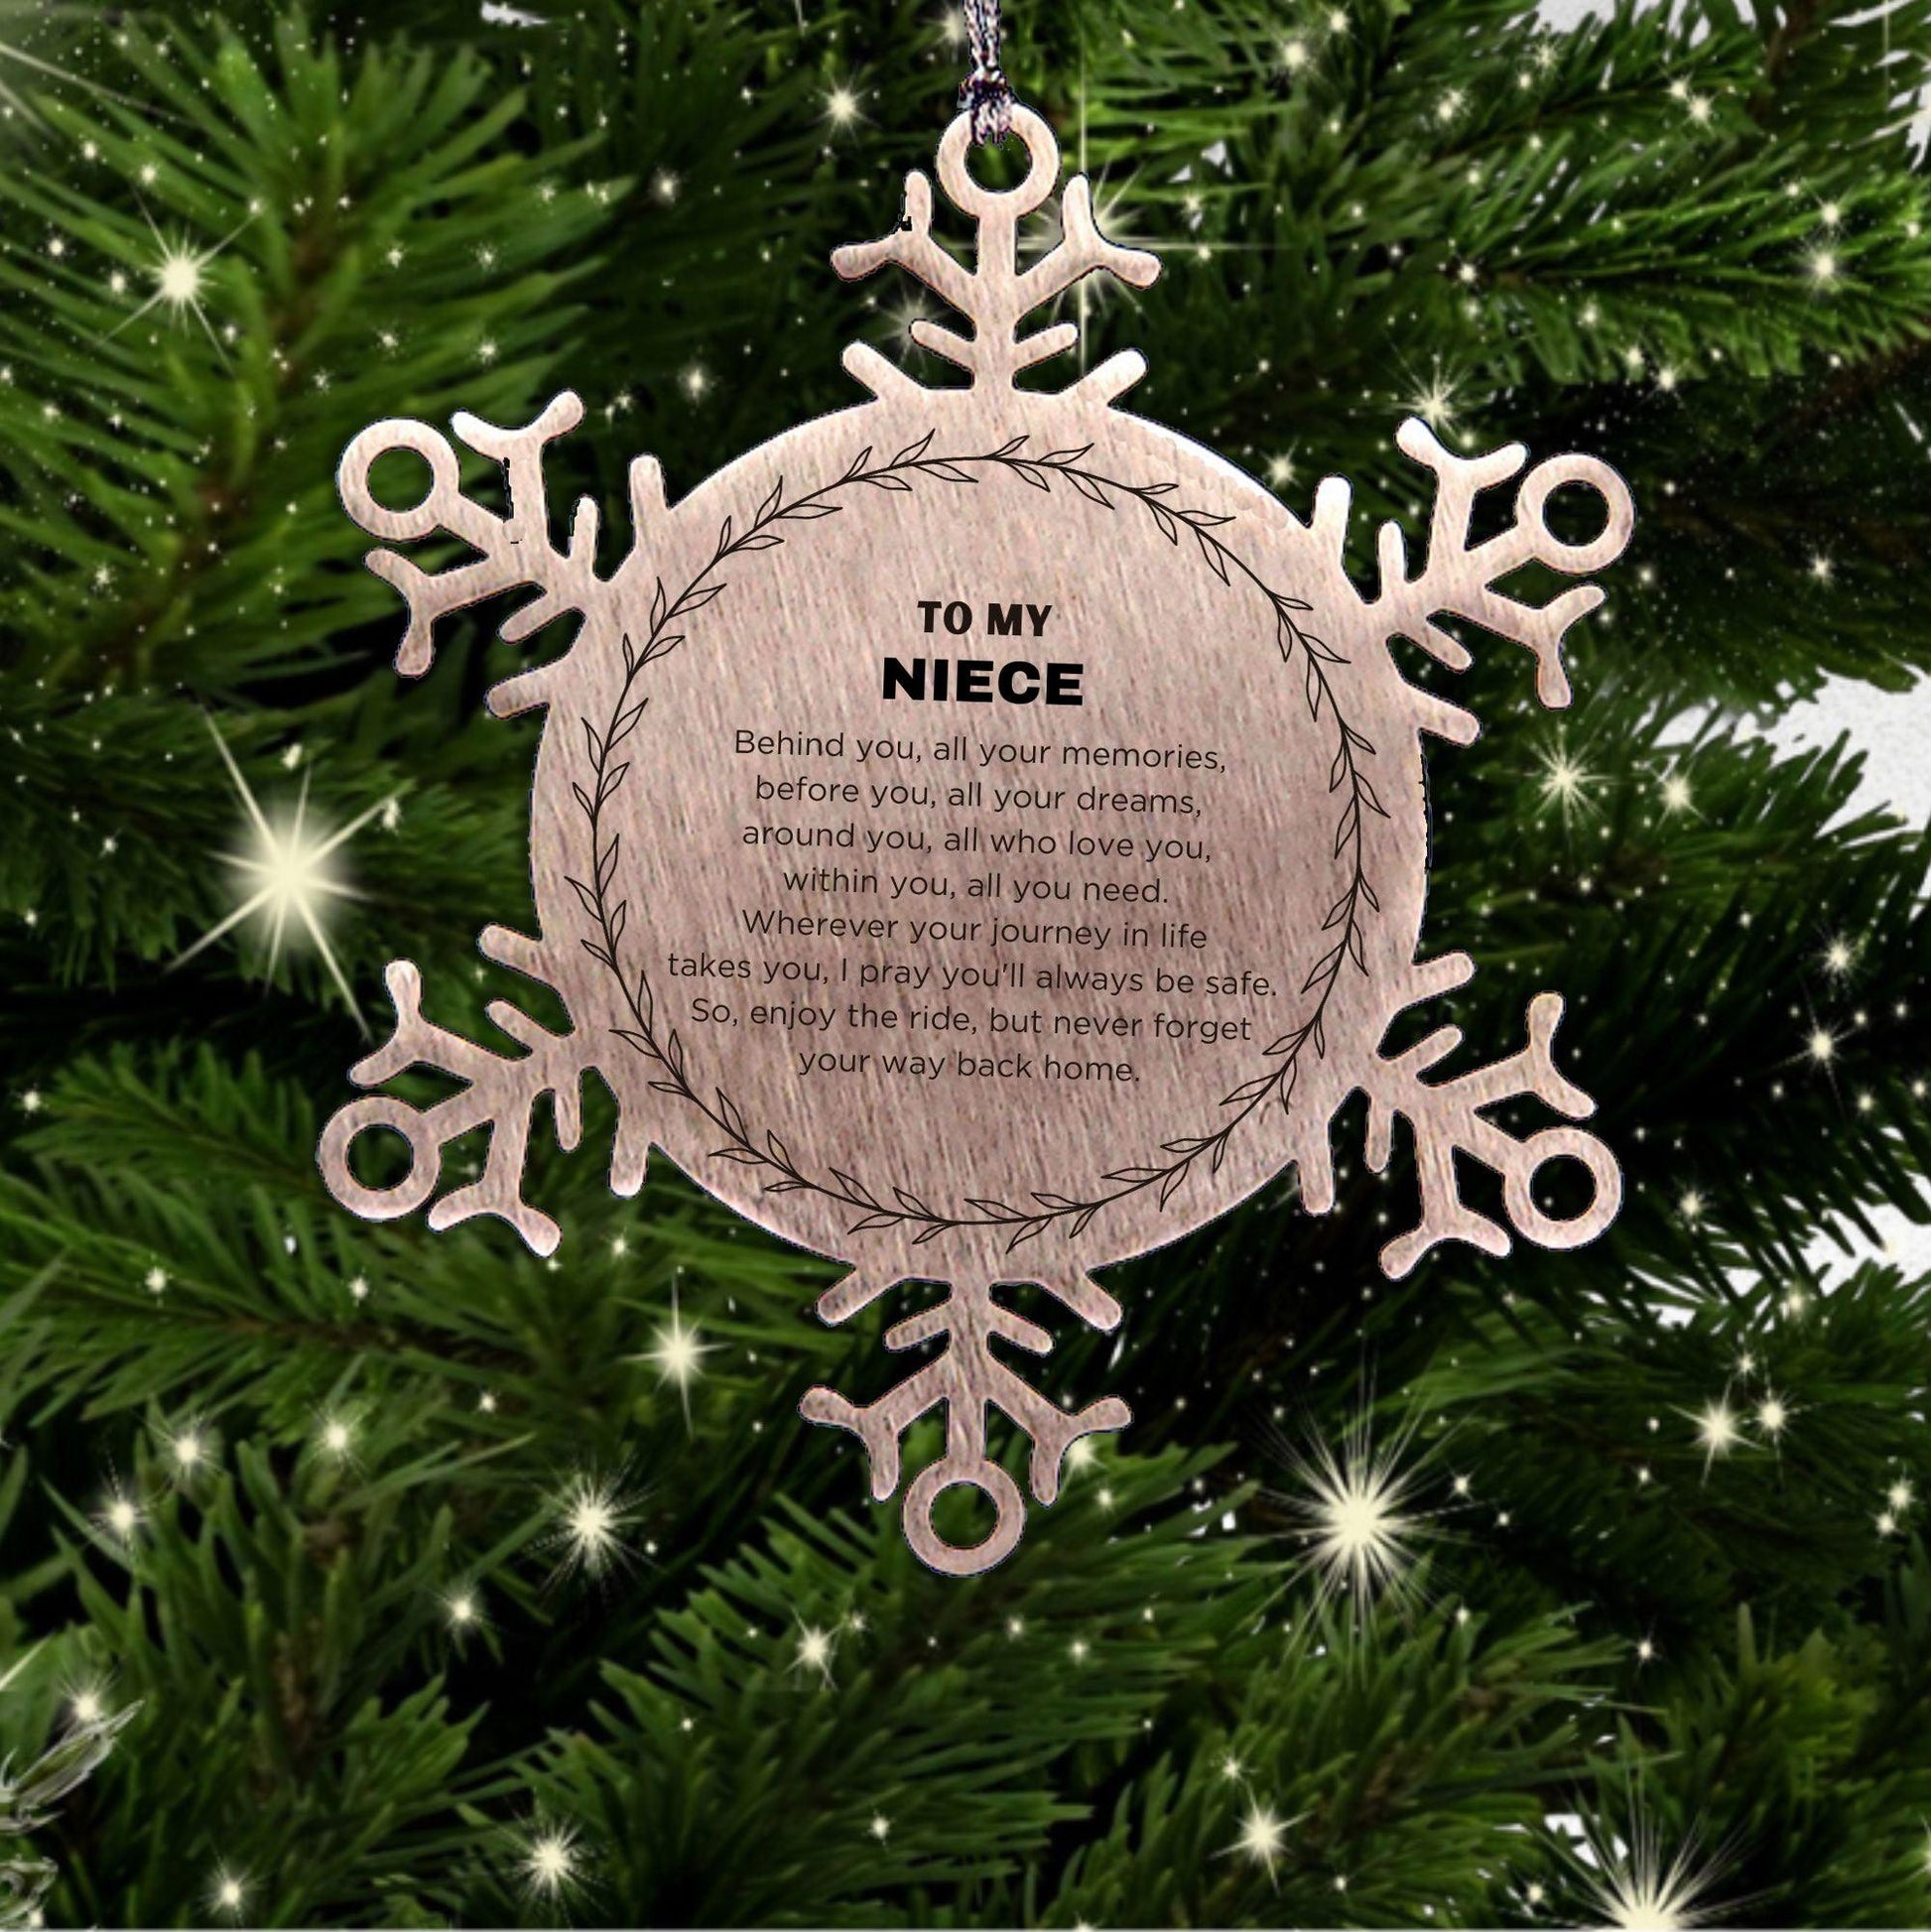 Inspirational Niece Snowflake Ornament - Behind you, all your Memories, Before you, all your Dreams - Birthday, Christmas Holiday Gifts - Mallard Moon Gift Shop